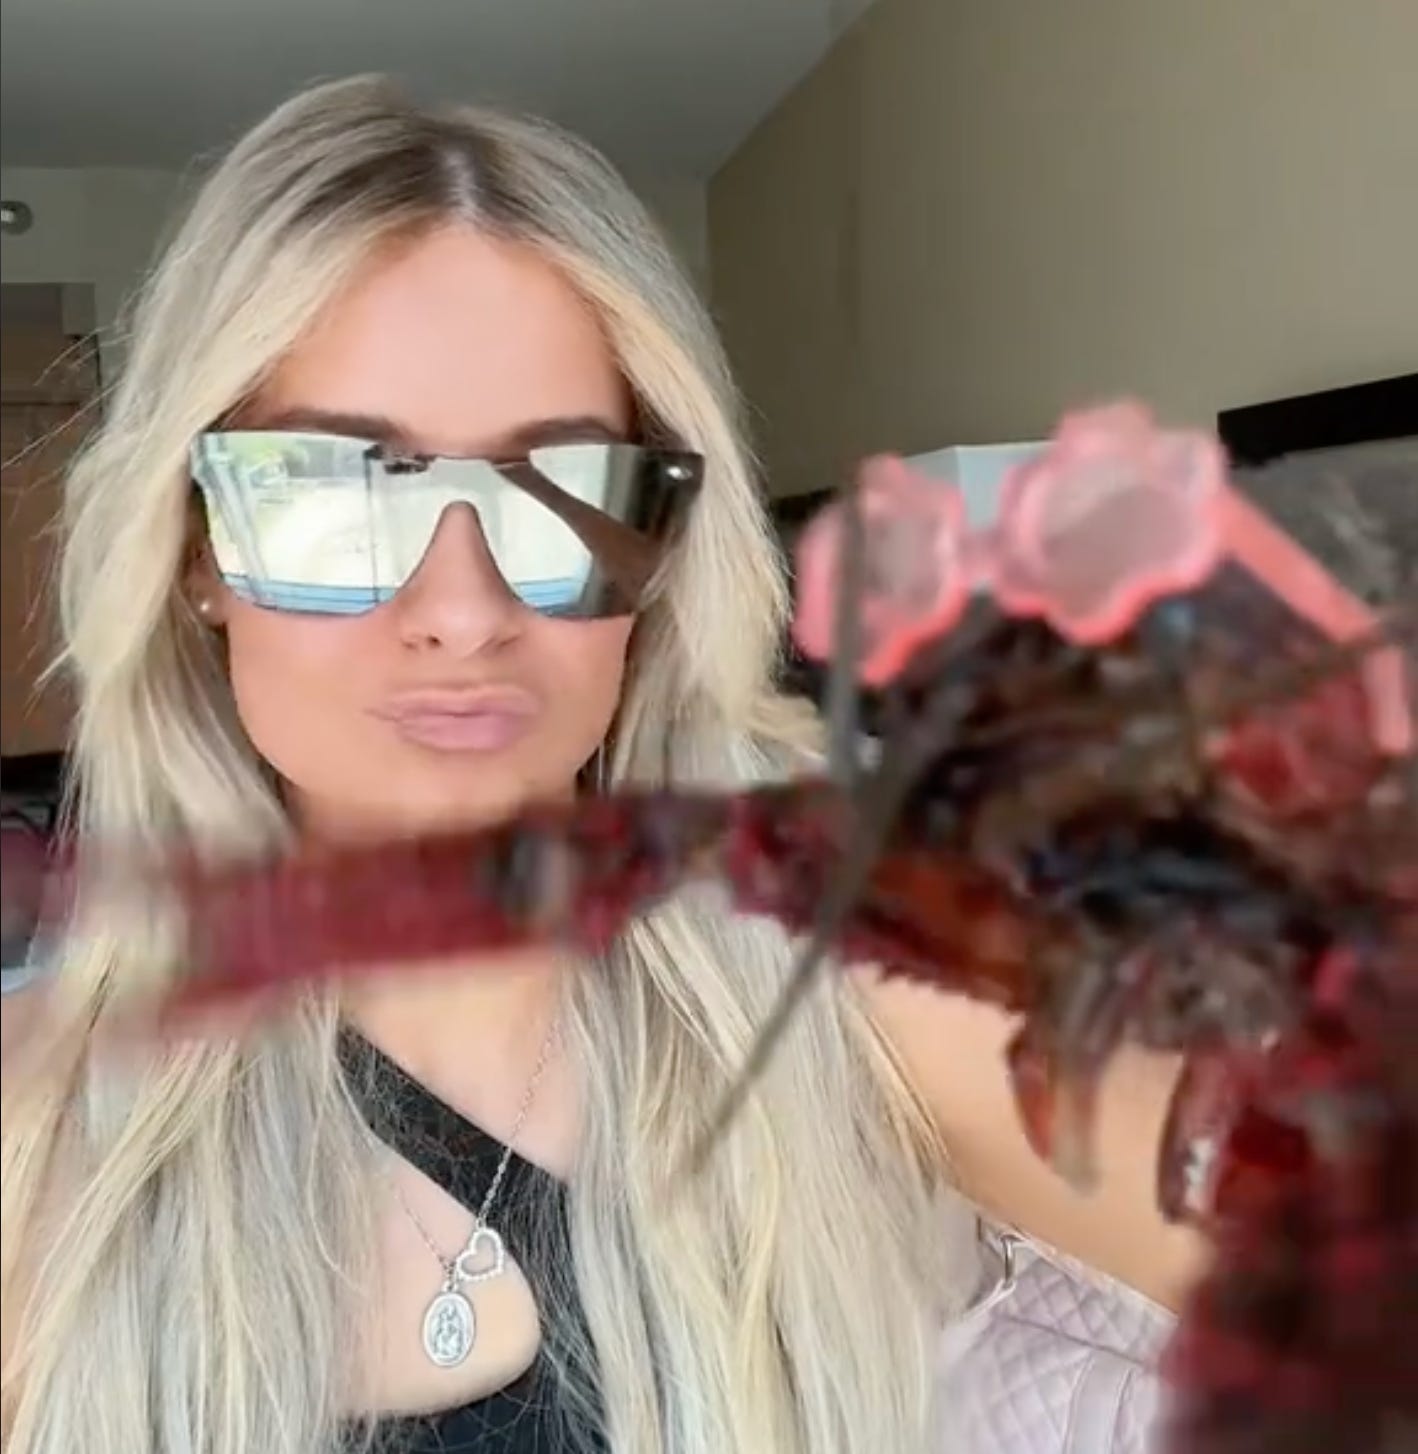 A blonde woman in sunglasses is making duck face while holding up a crawfish to the camera. The crawfish is also wearing sunglasses -- tiny pink flowers.